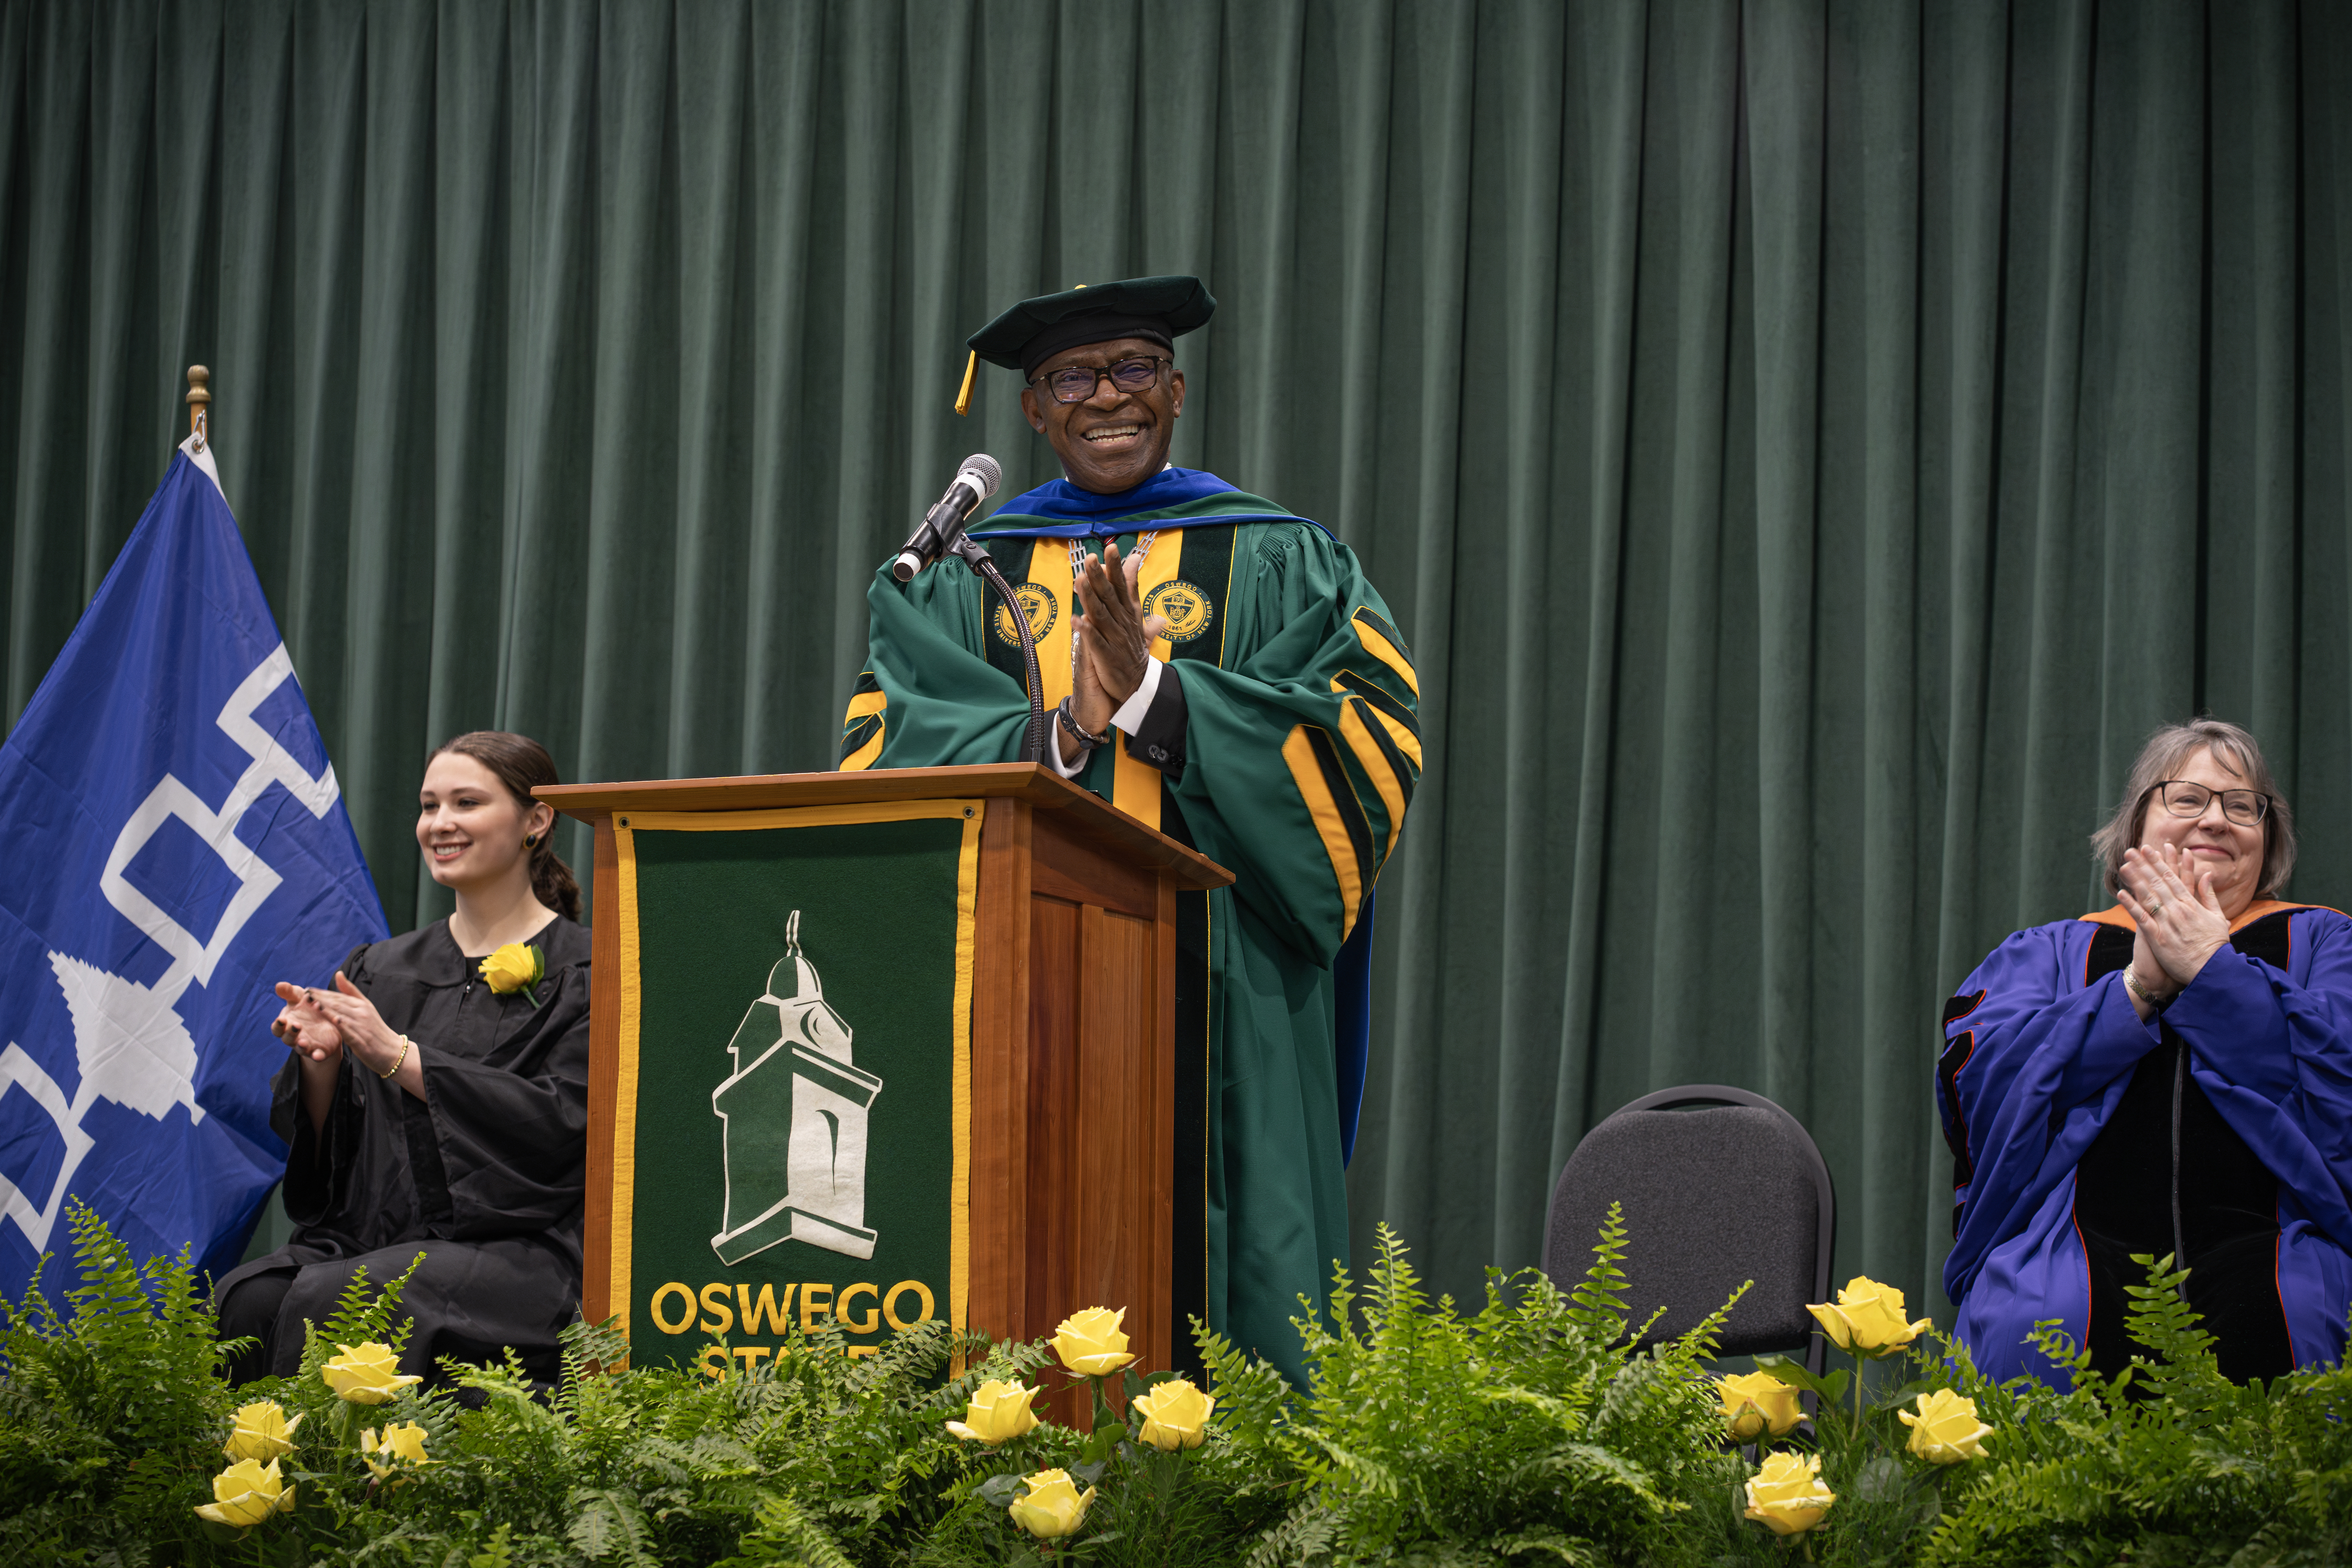 At Honors Convocation on April 19, President Peter O. Nwosu and platform party members Kylie Annable (left), president of the Vega Junior and Senior Women’s Honor Society that coordinates the ceremony, and Elizabeth Dunne Schmitt, chair of Faculty Assembly and professor of economics, applaud the more than 130 students who received awards at the ceremony as well as all those who supported these achievers.